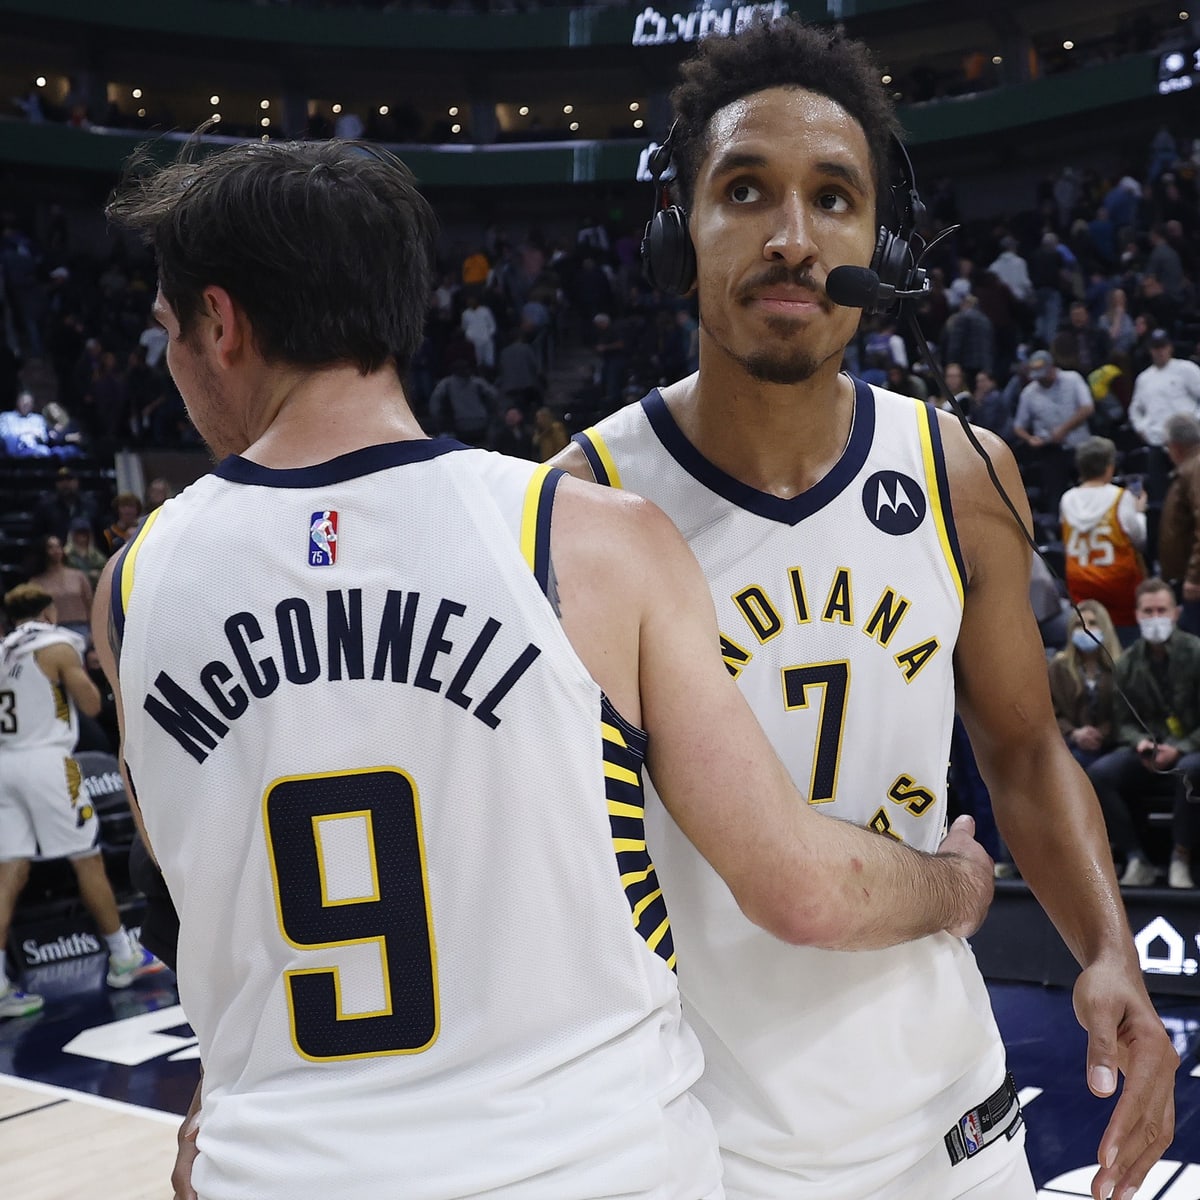 NBA: Here's What Malcolm Brogdon Tweeted Before The Indiana Pacers